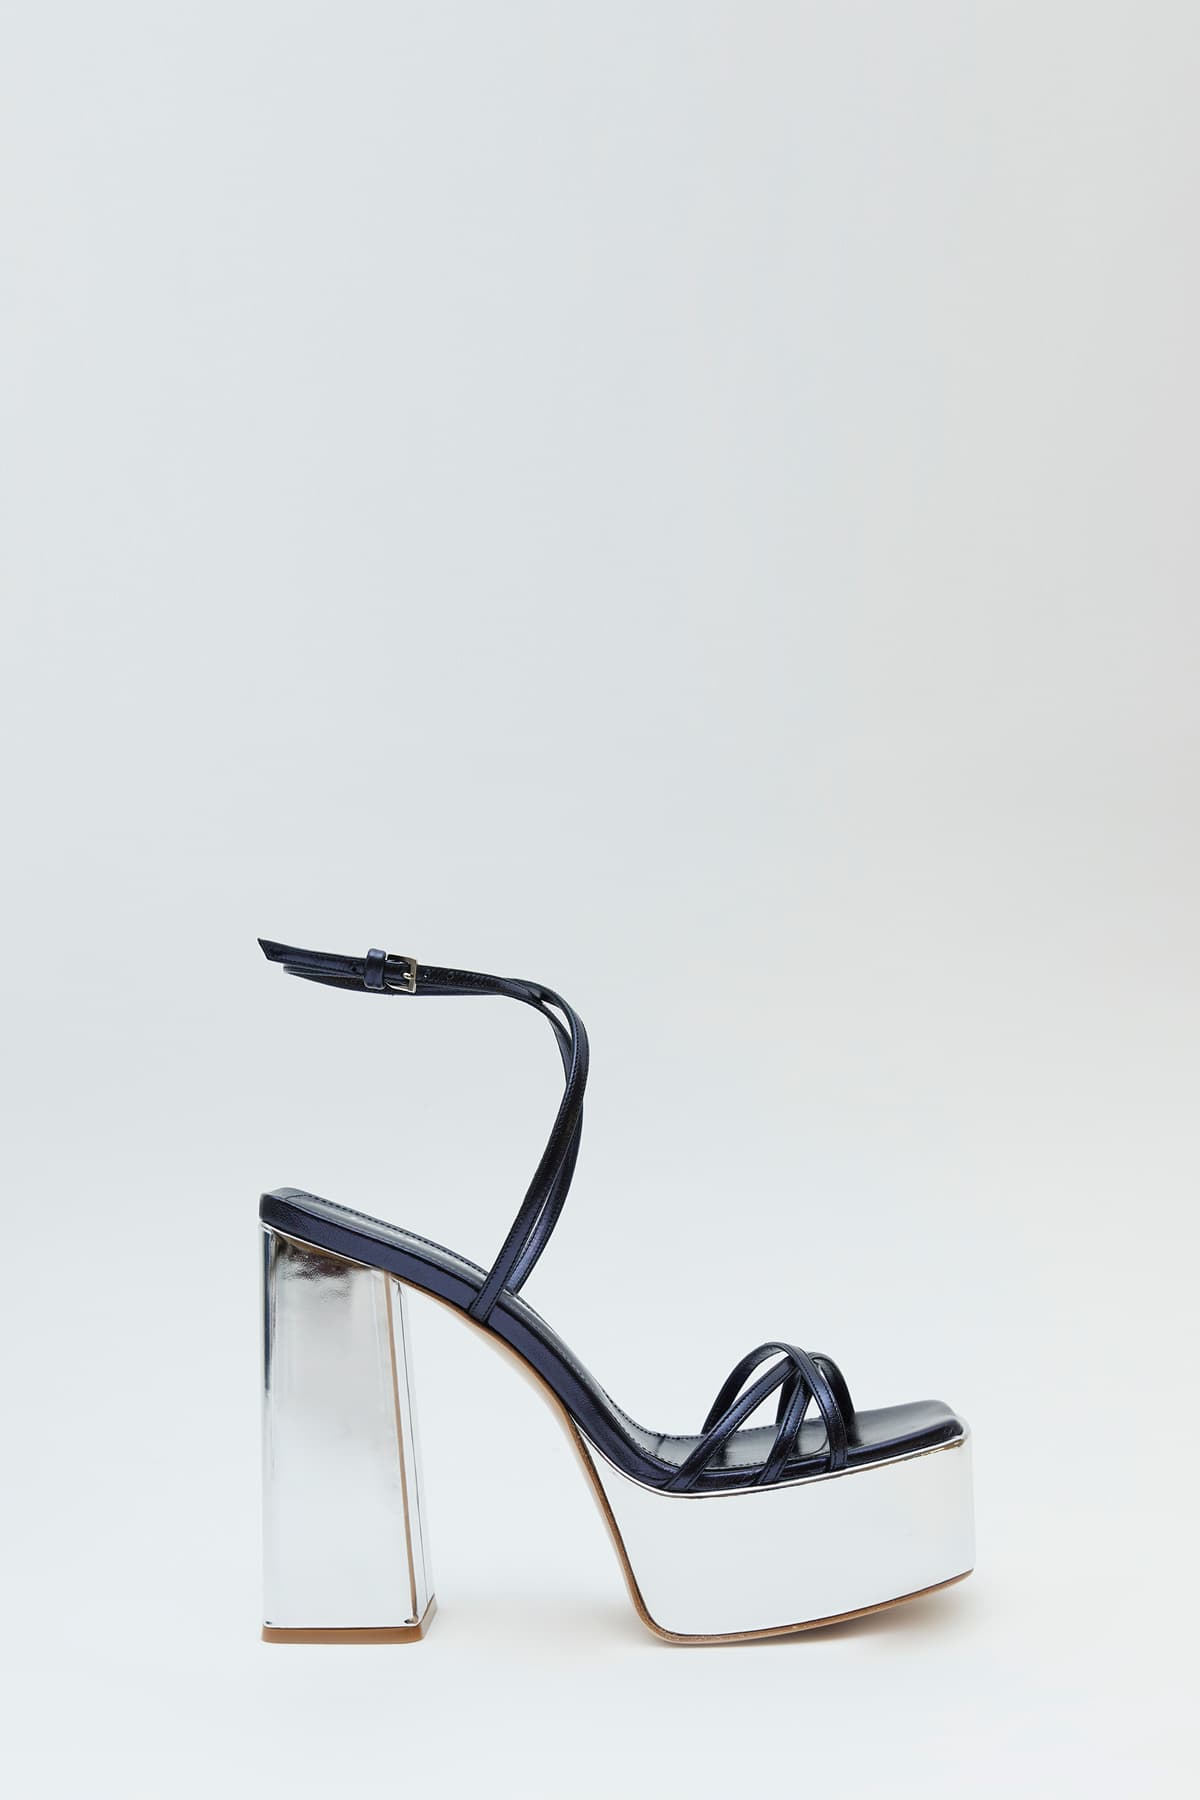 Sideview of The Wannabe sandal in silver and blue from the Haus of Honey fall-winter 2023-24